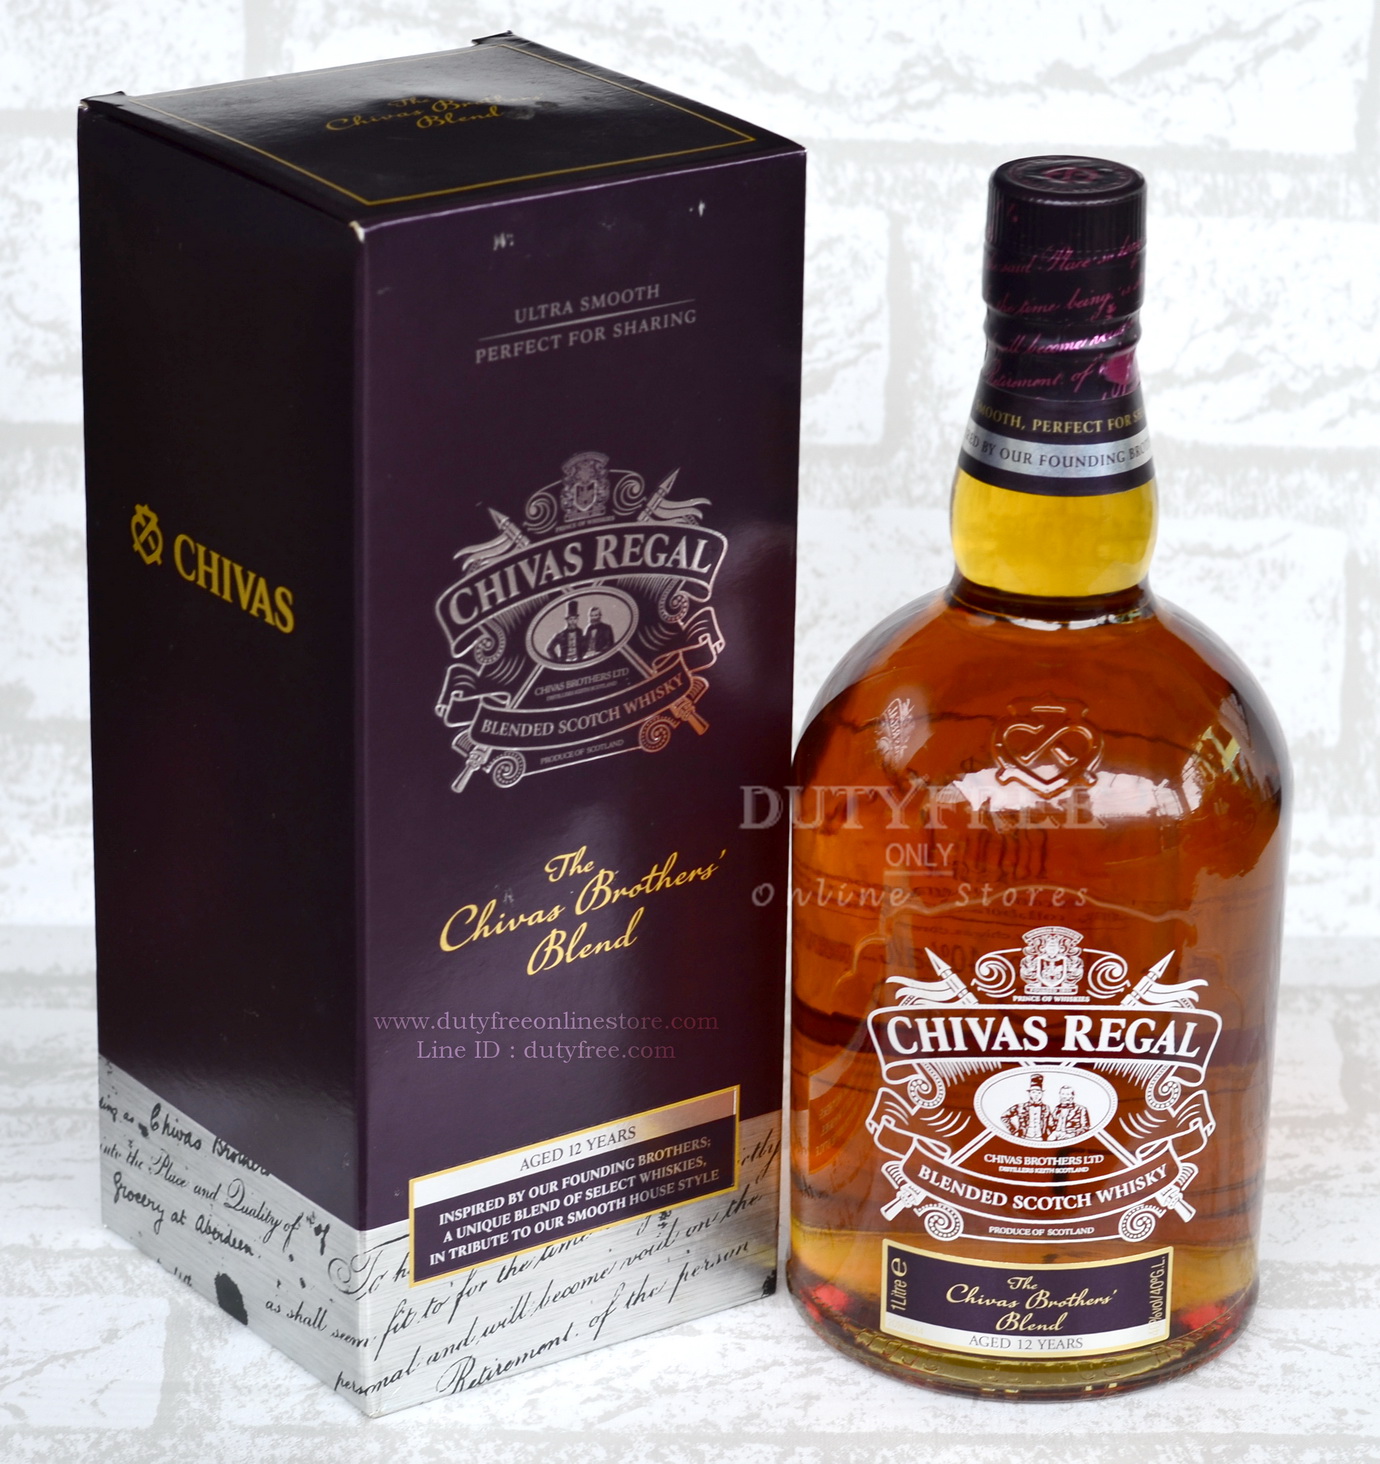 Chivas Regal brothers Blend 12 year old